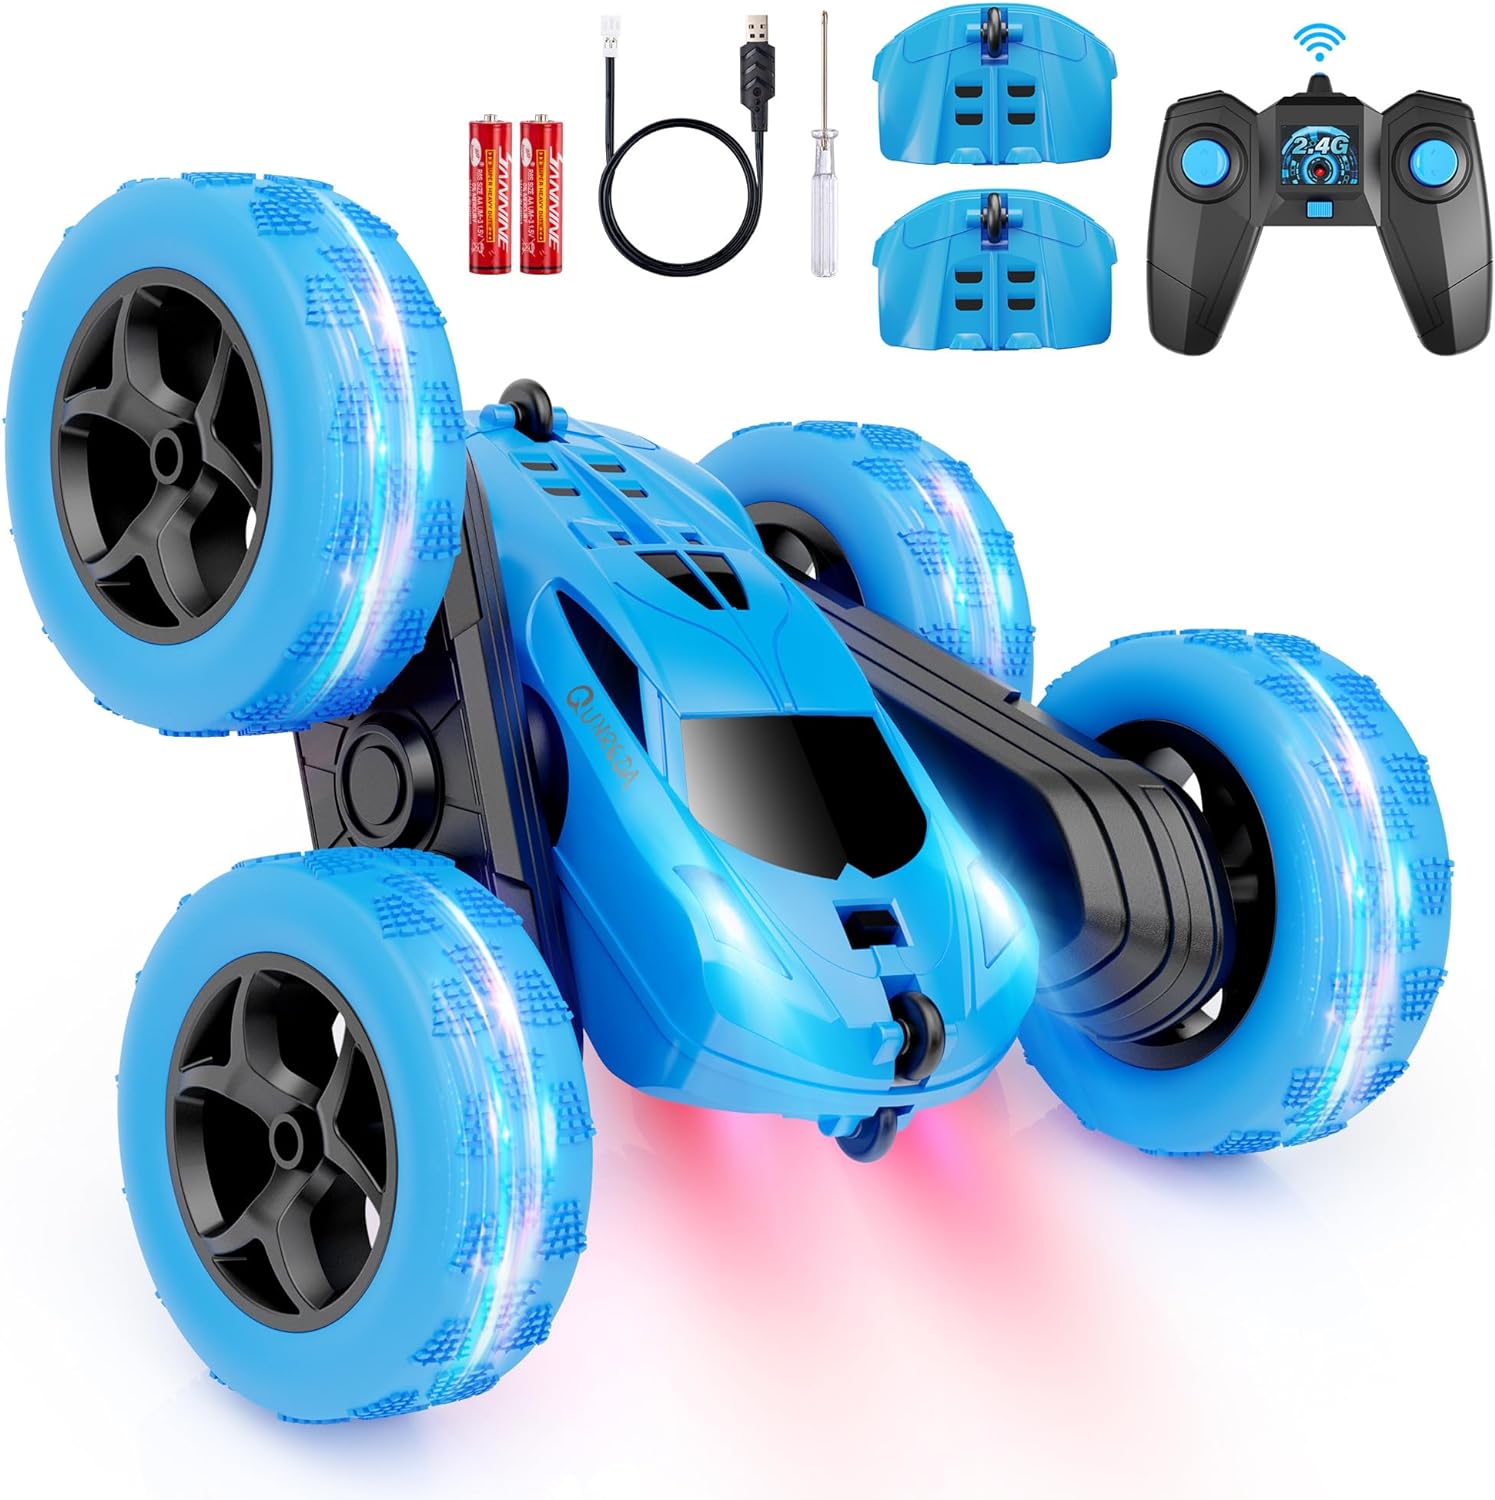 You are currently viewing QUNREDA Remote Control Car Review